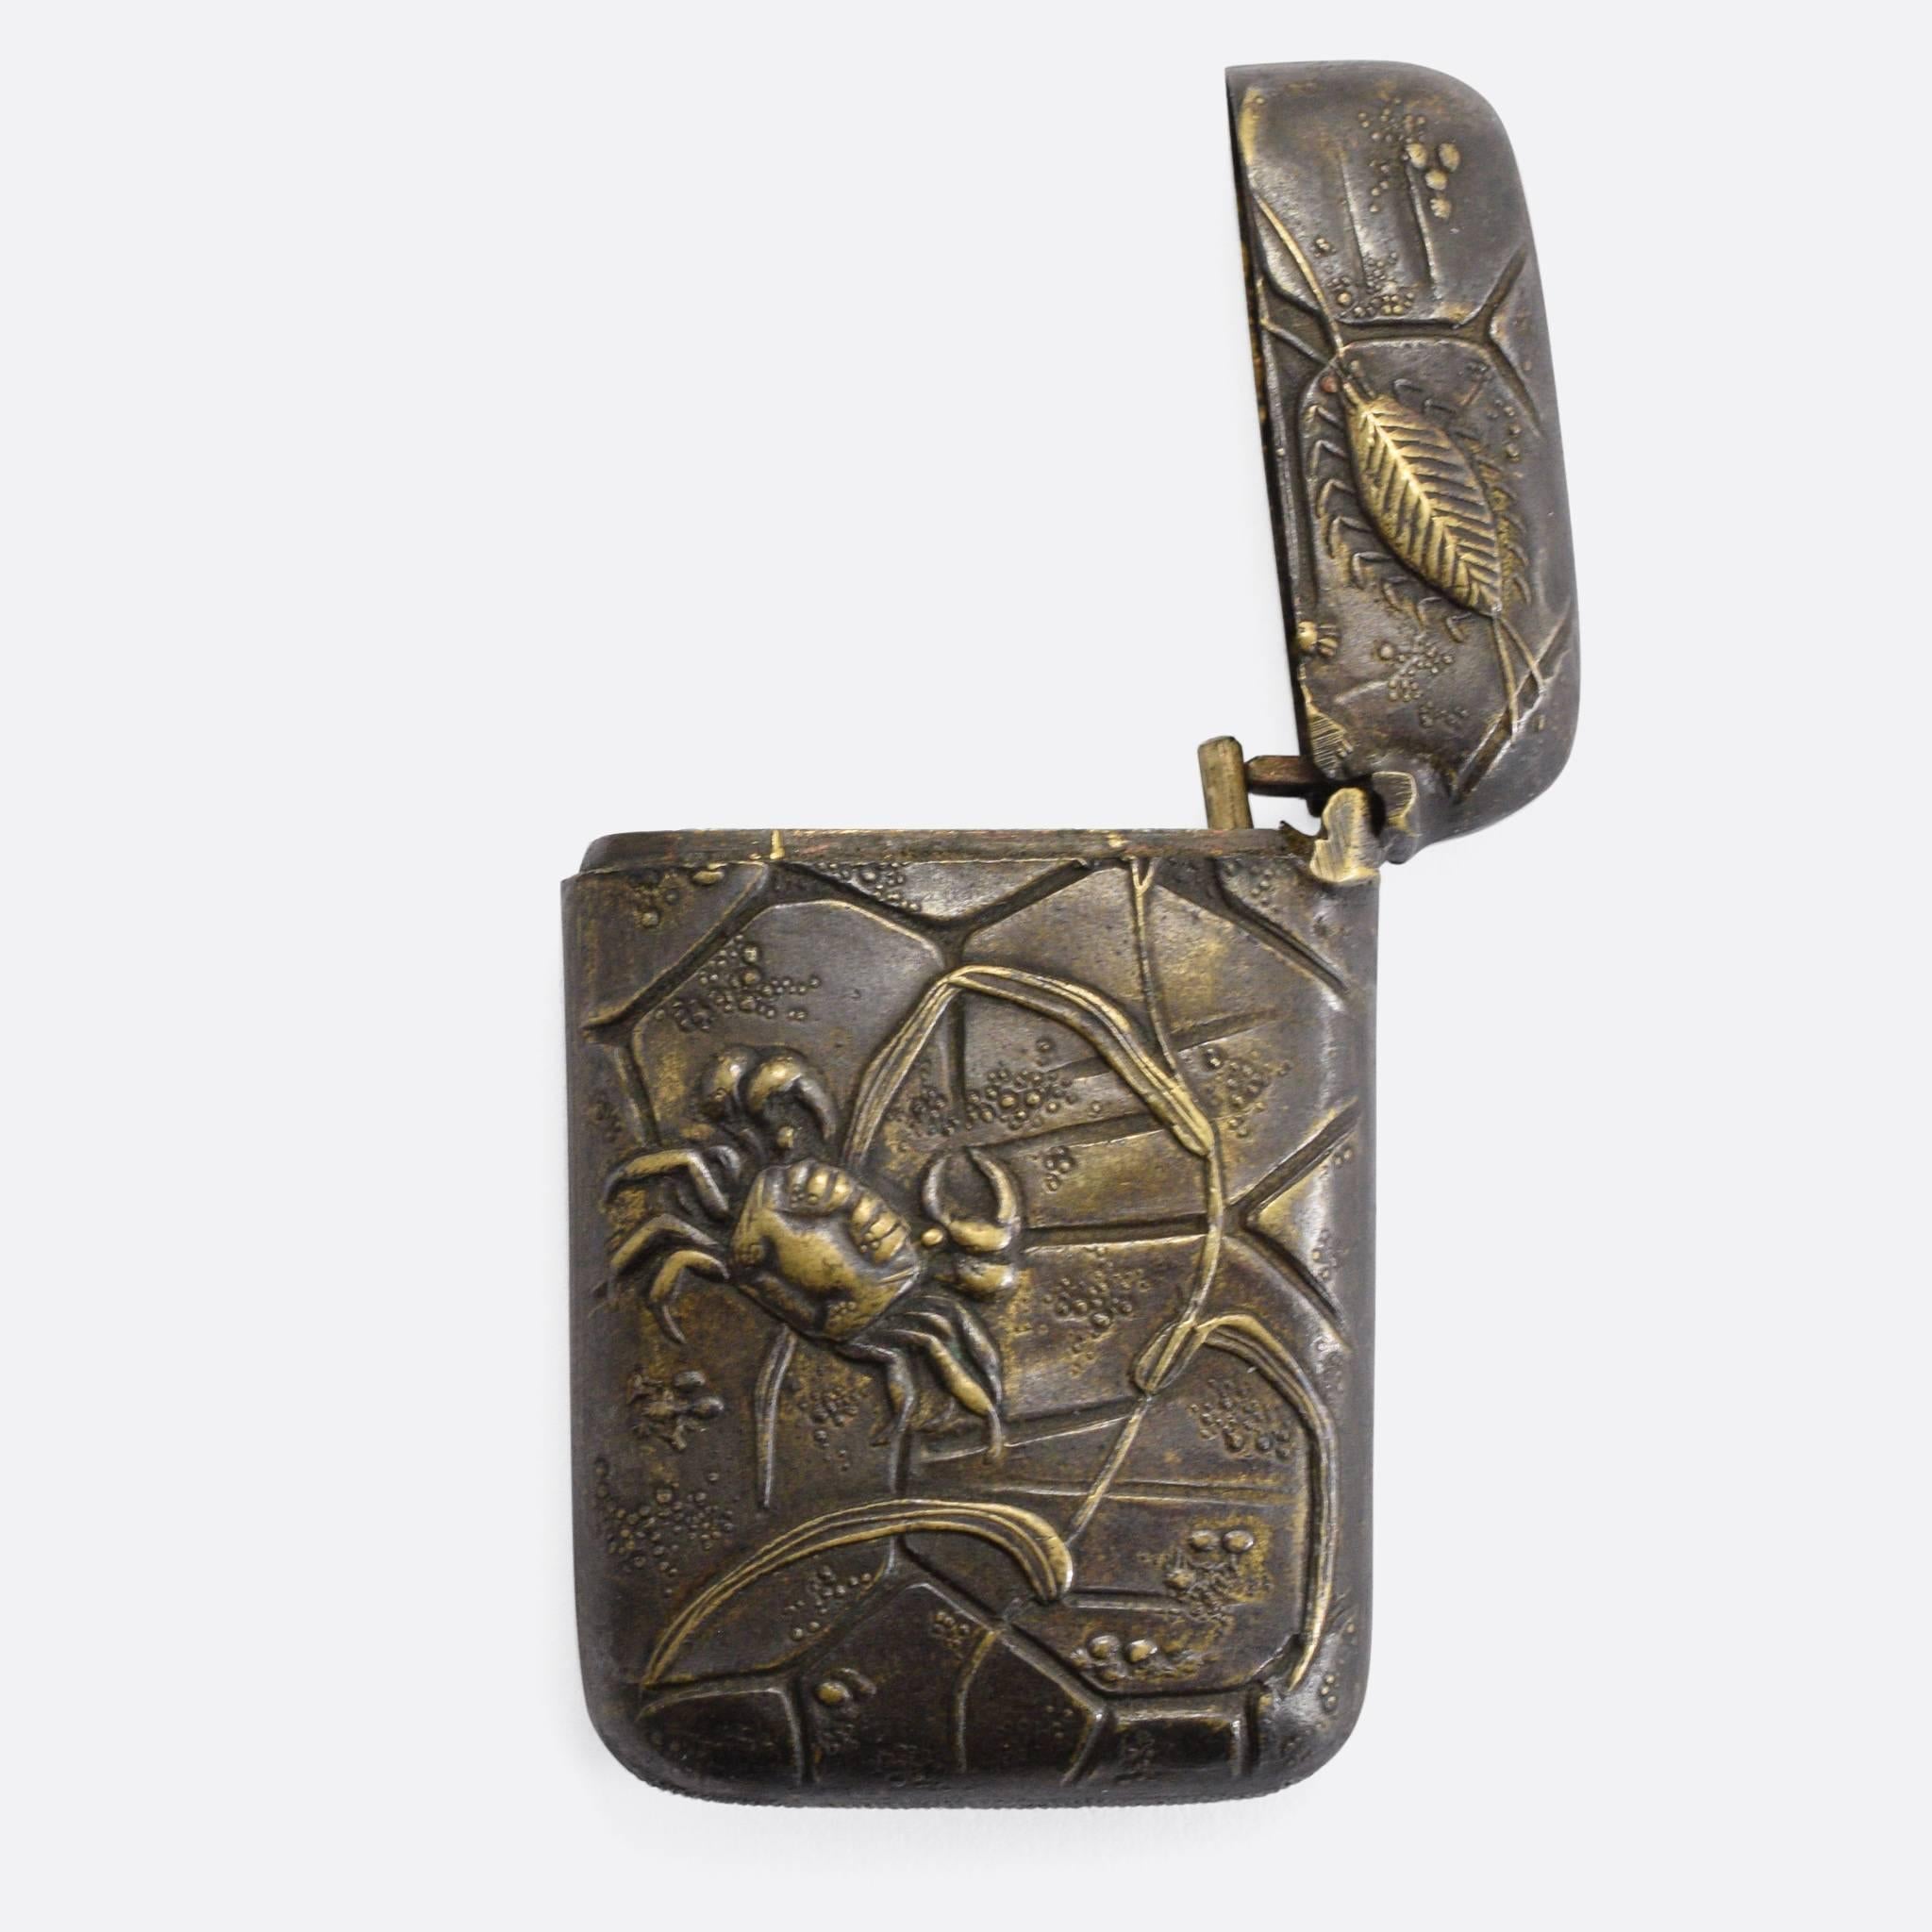 A fine example of Japanese Mokume-gane mixed metalwork. This vesta case is decorated with crabs and other sea creatures - in relief - above a kind of 